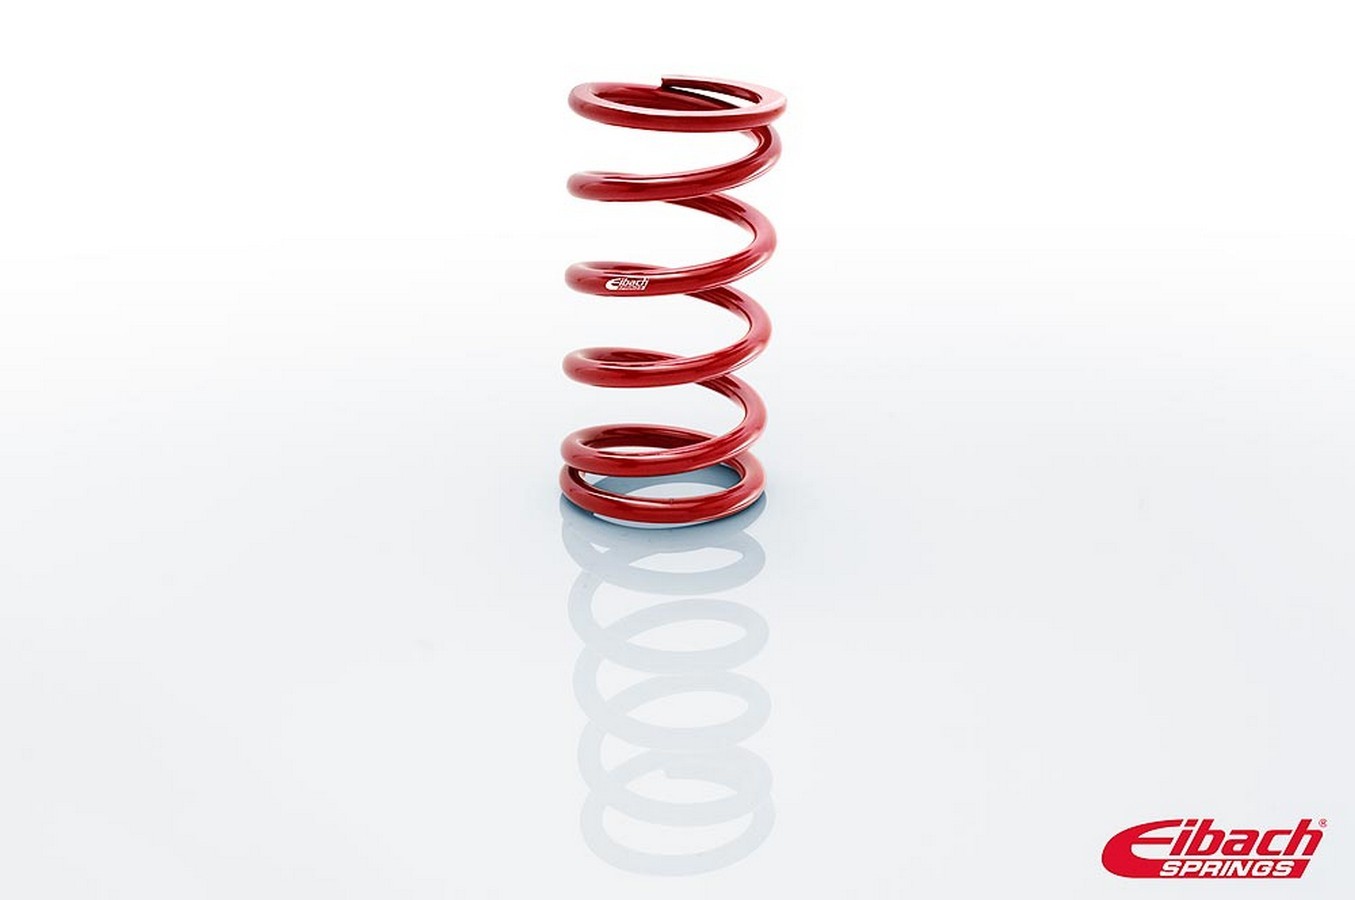 Eibach 0950.500.0550 Coil Spring, Coil-Over, 5.0 in OD, 9.500 in Length, 550 lb/in Spring Rate, Front, Steel, Red Powder Coat, Each